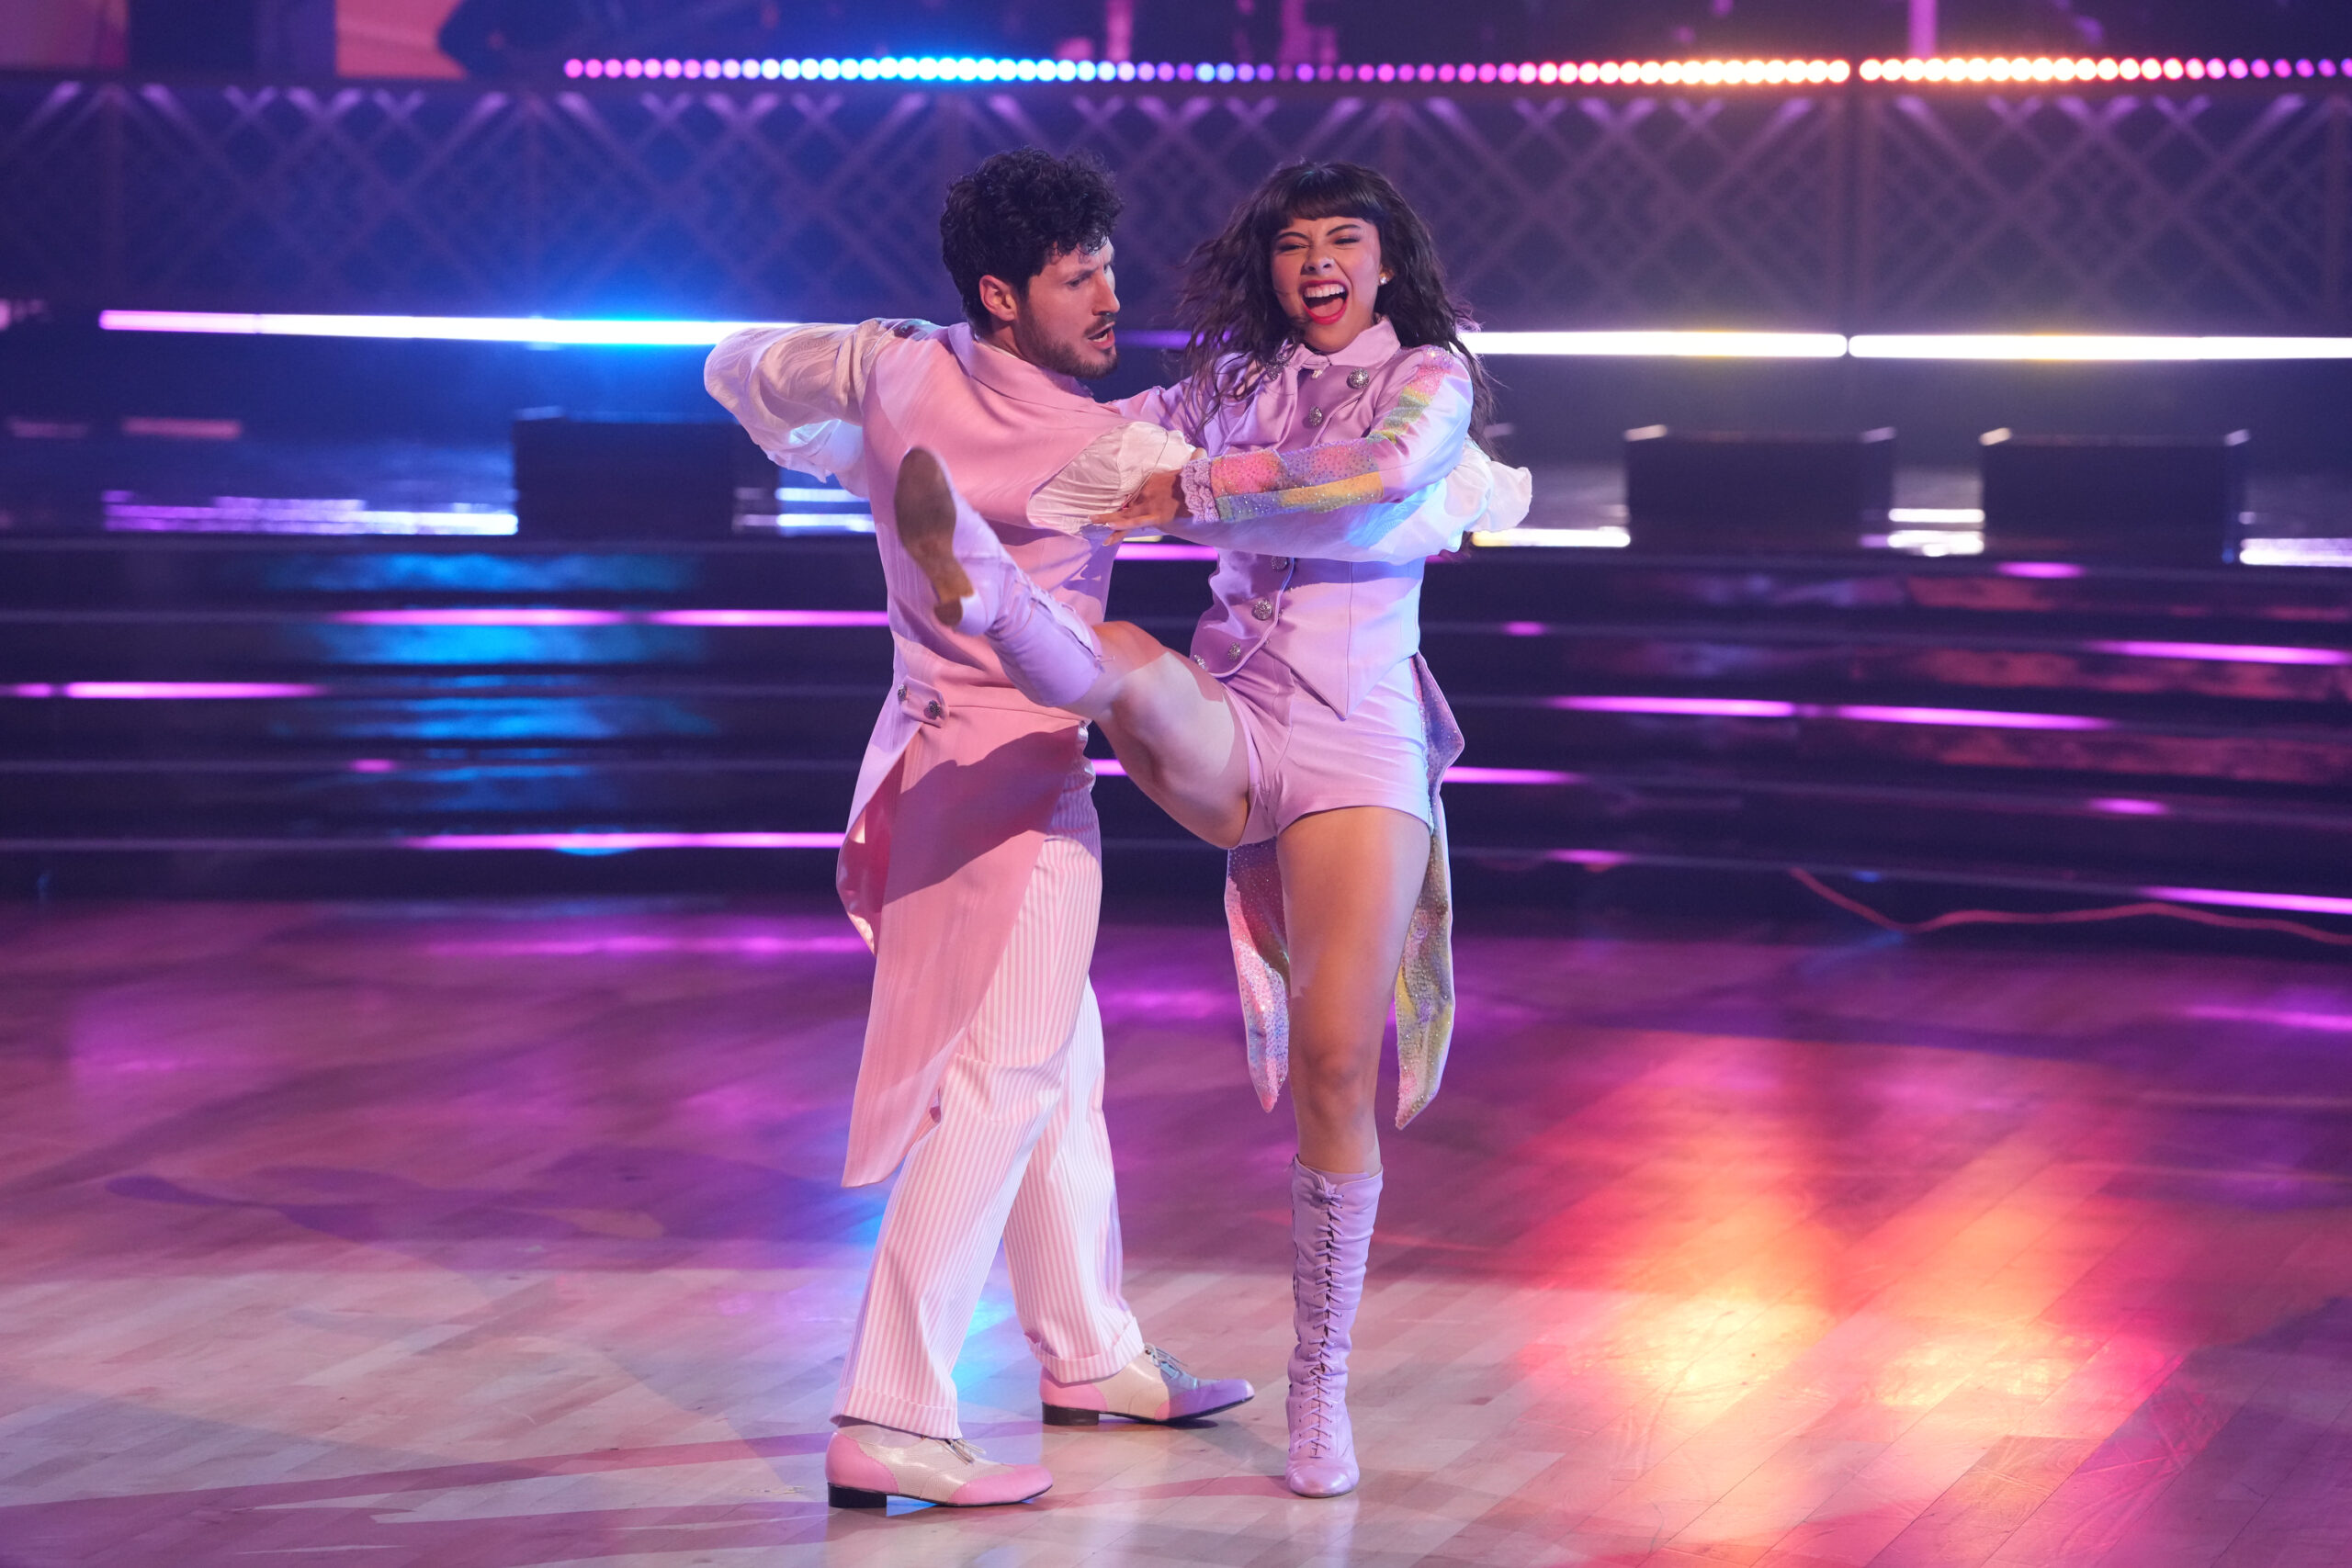 Xochitl Gomez and Valentin Chmerkovskiy perform a quickstep to “Paper Rings” by Taylor Swift. Photo by Disney/Eric McCandless.